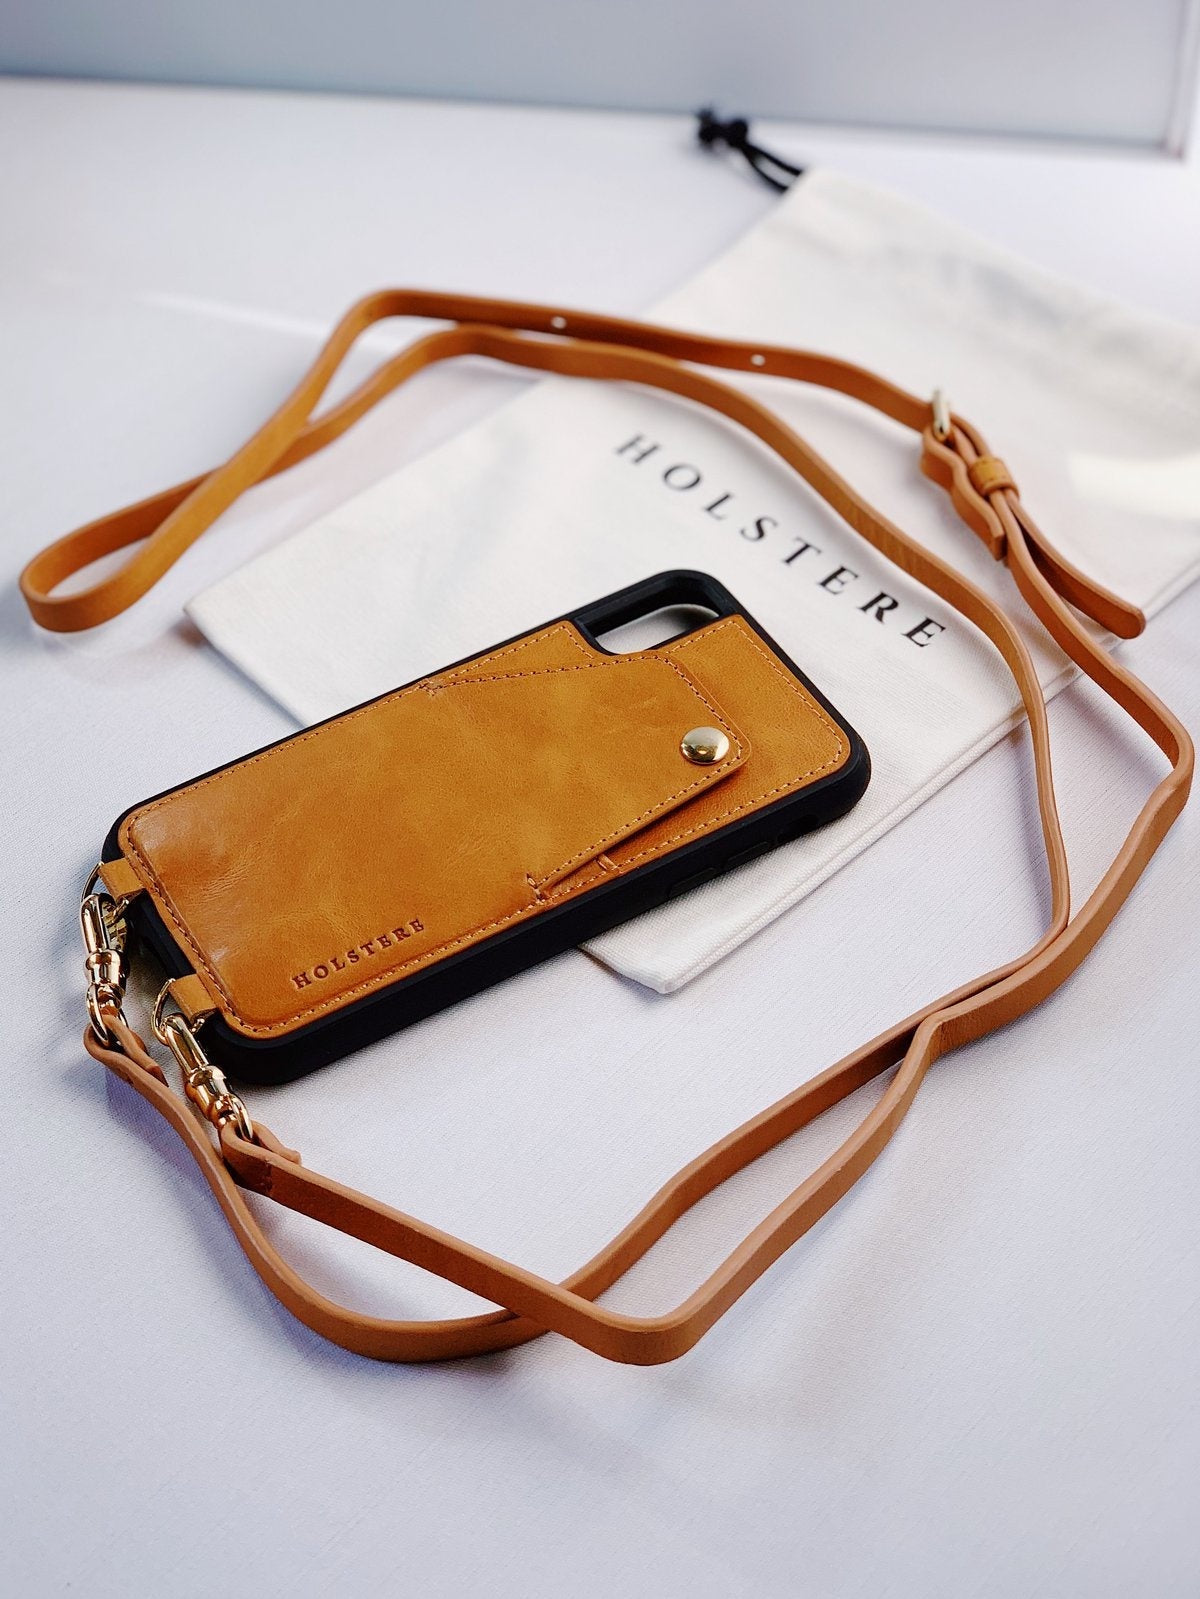 Holstere Tan London iphone pouch with gold hardware